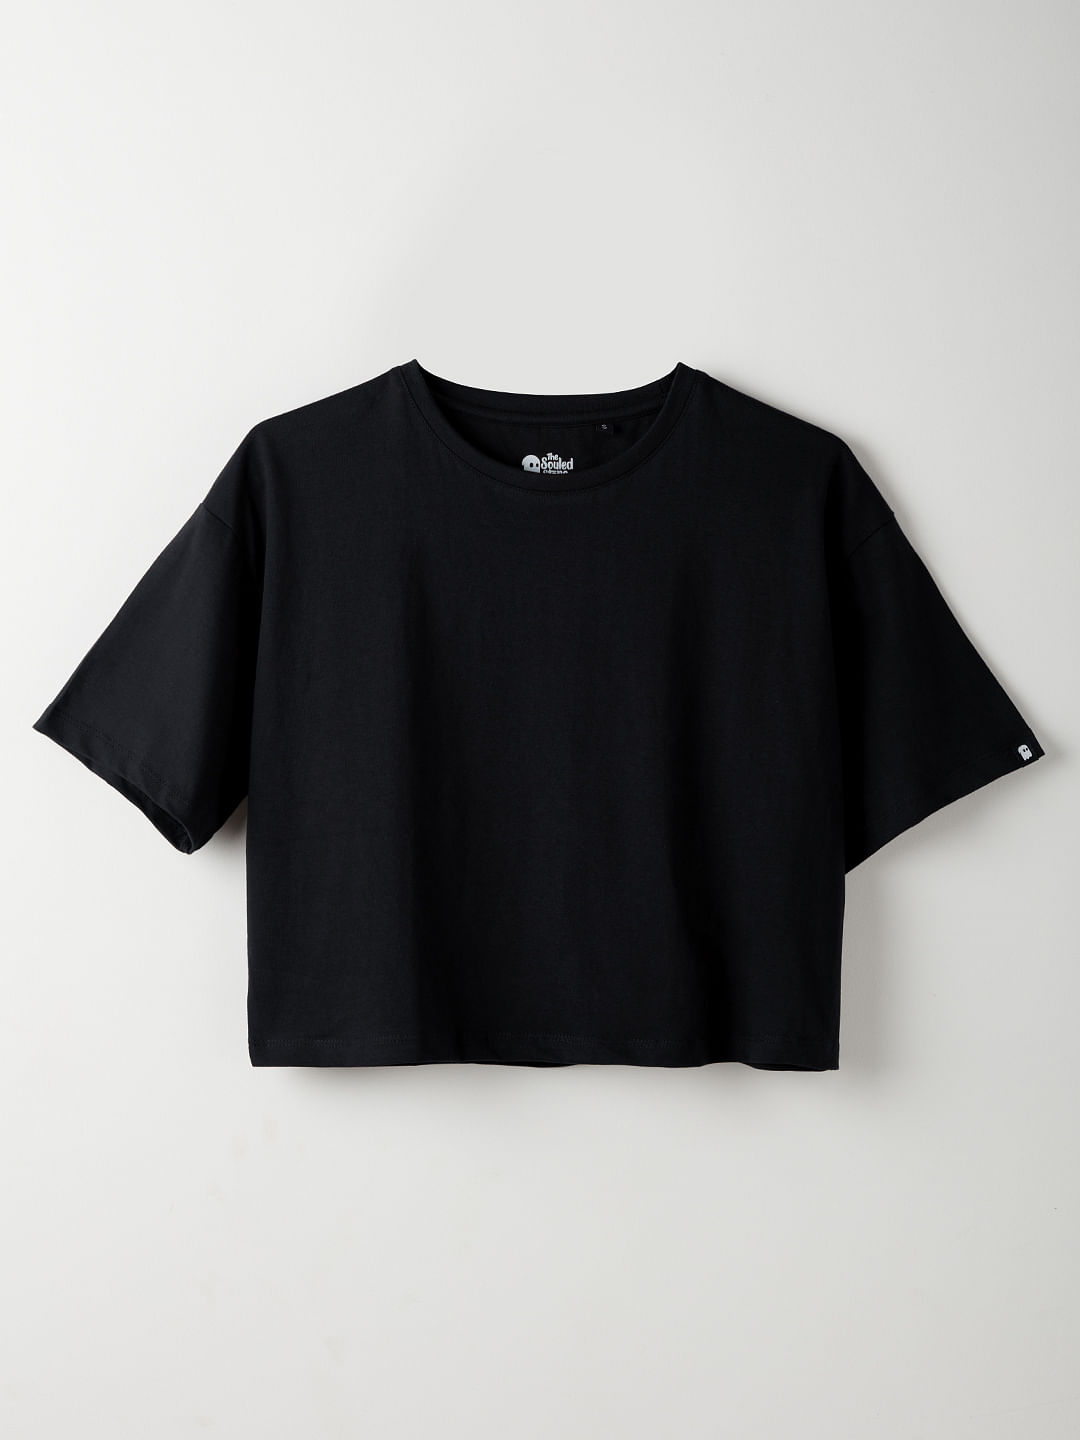 Buy Solids Black Women's Oversized Cropped T-Shirt online at The Souled ...